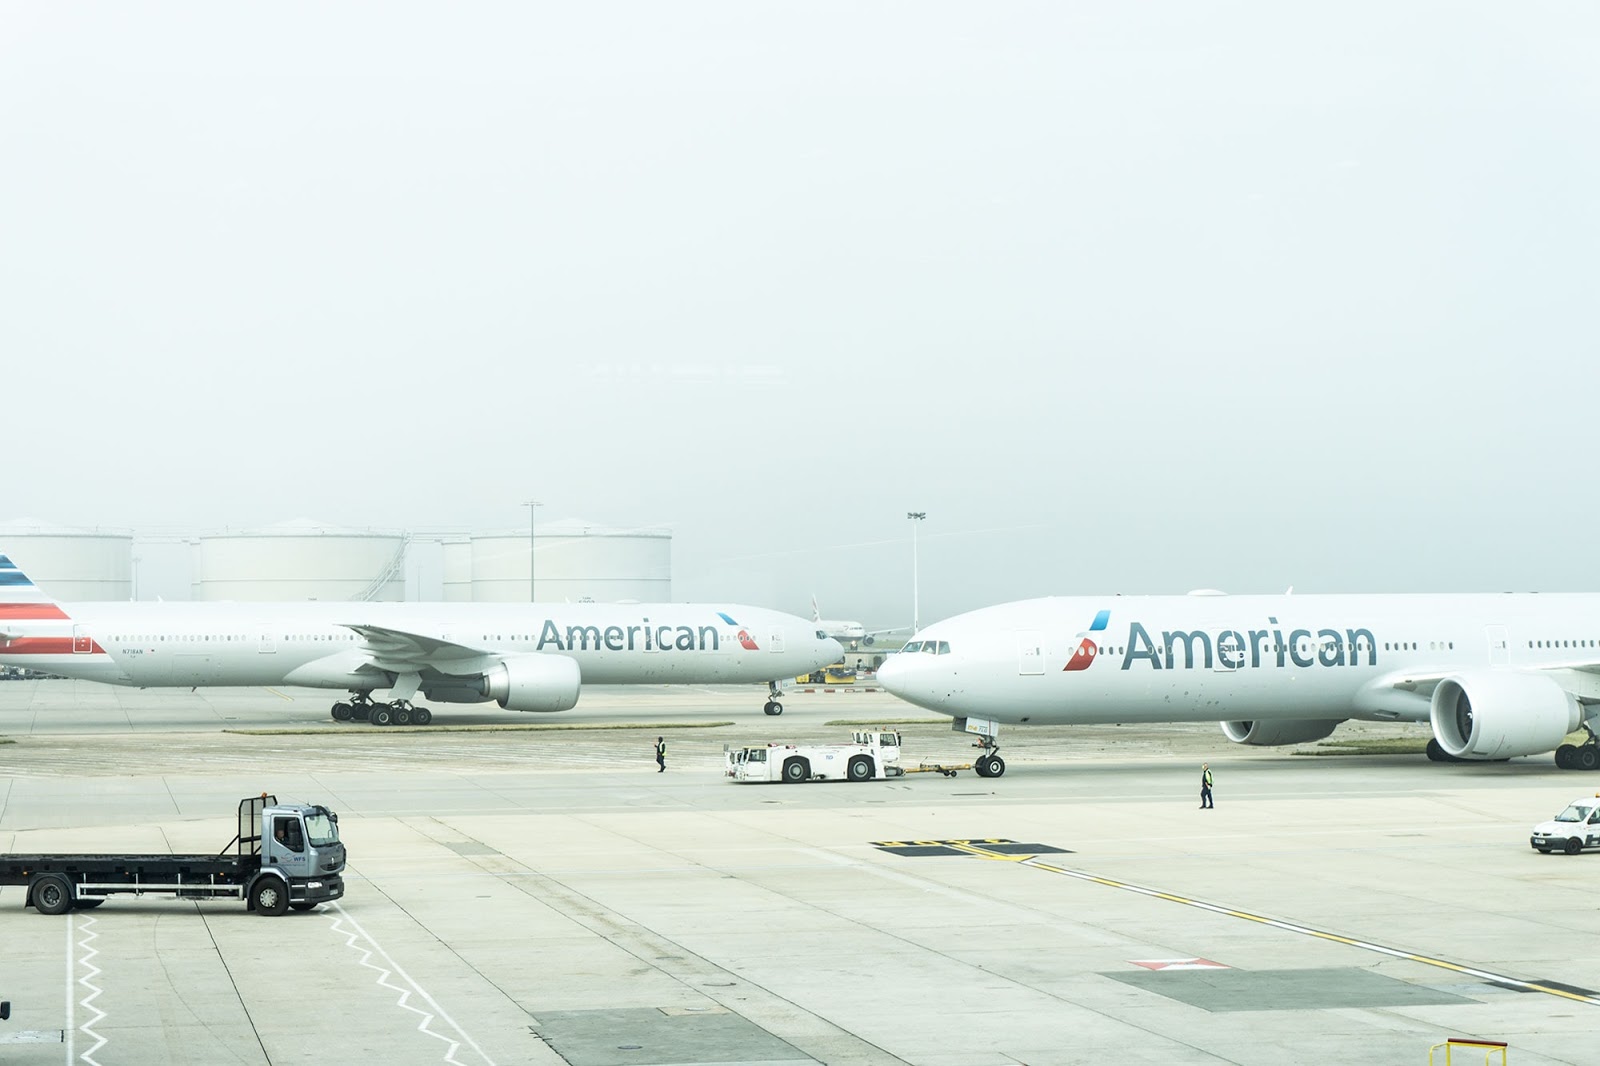 Two American airlines planes sit at the airport landing strip